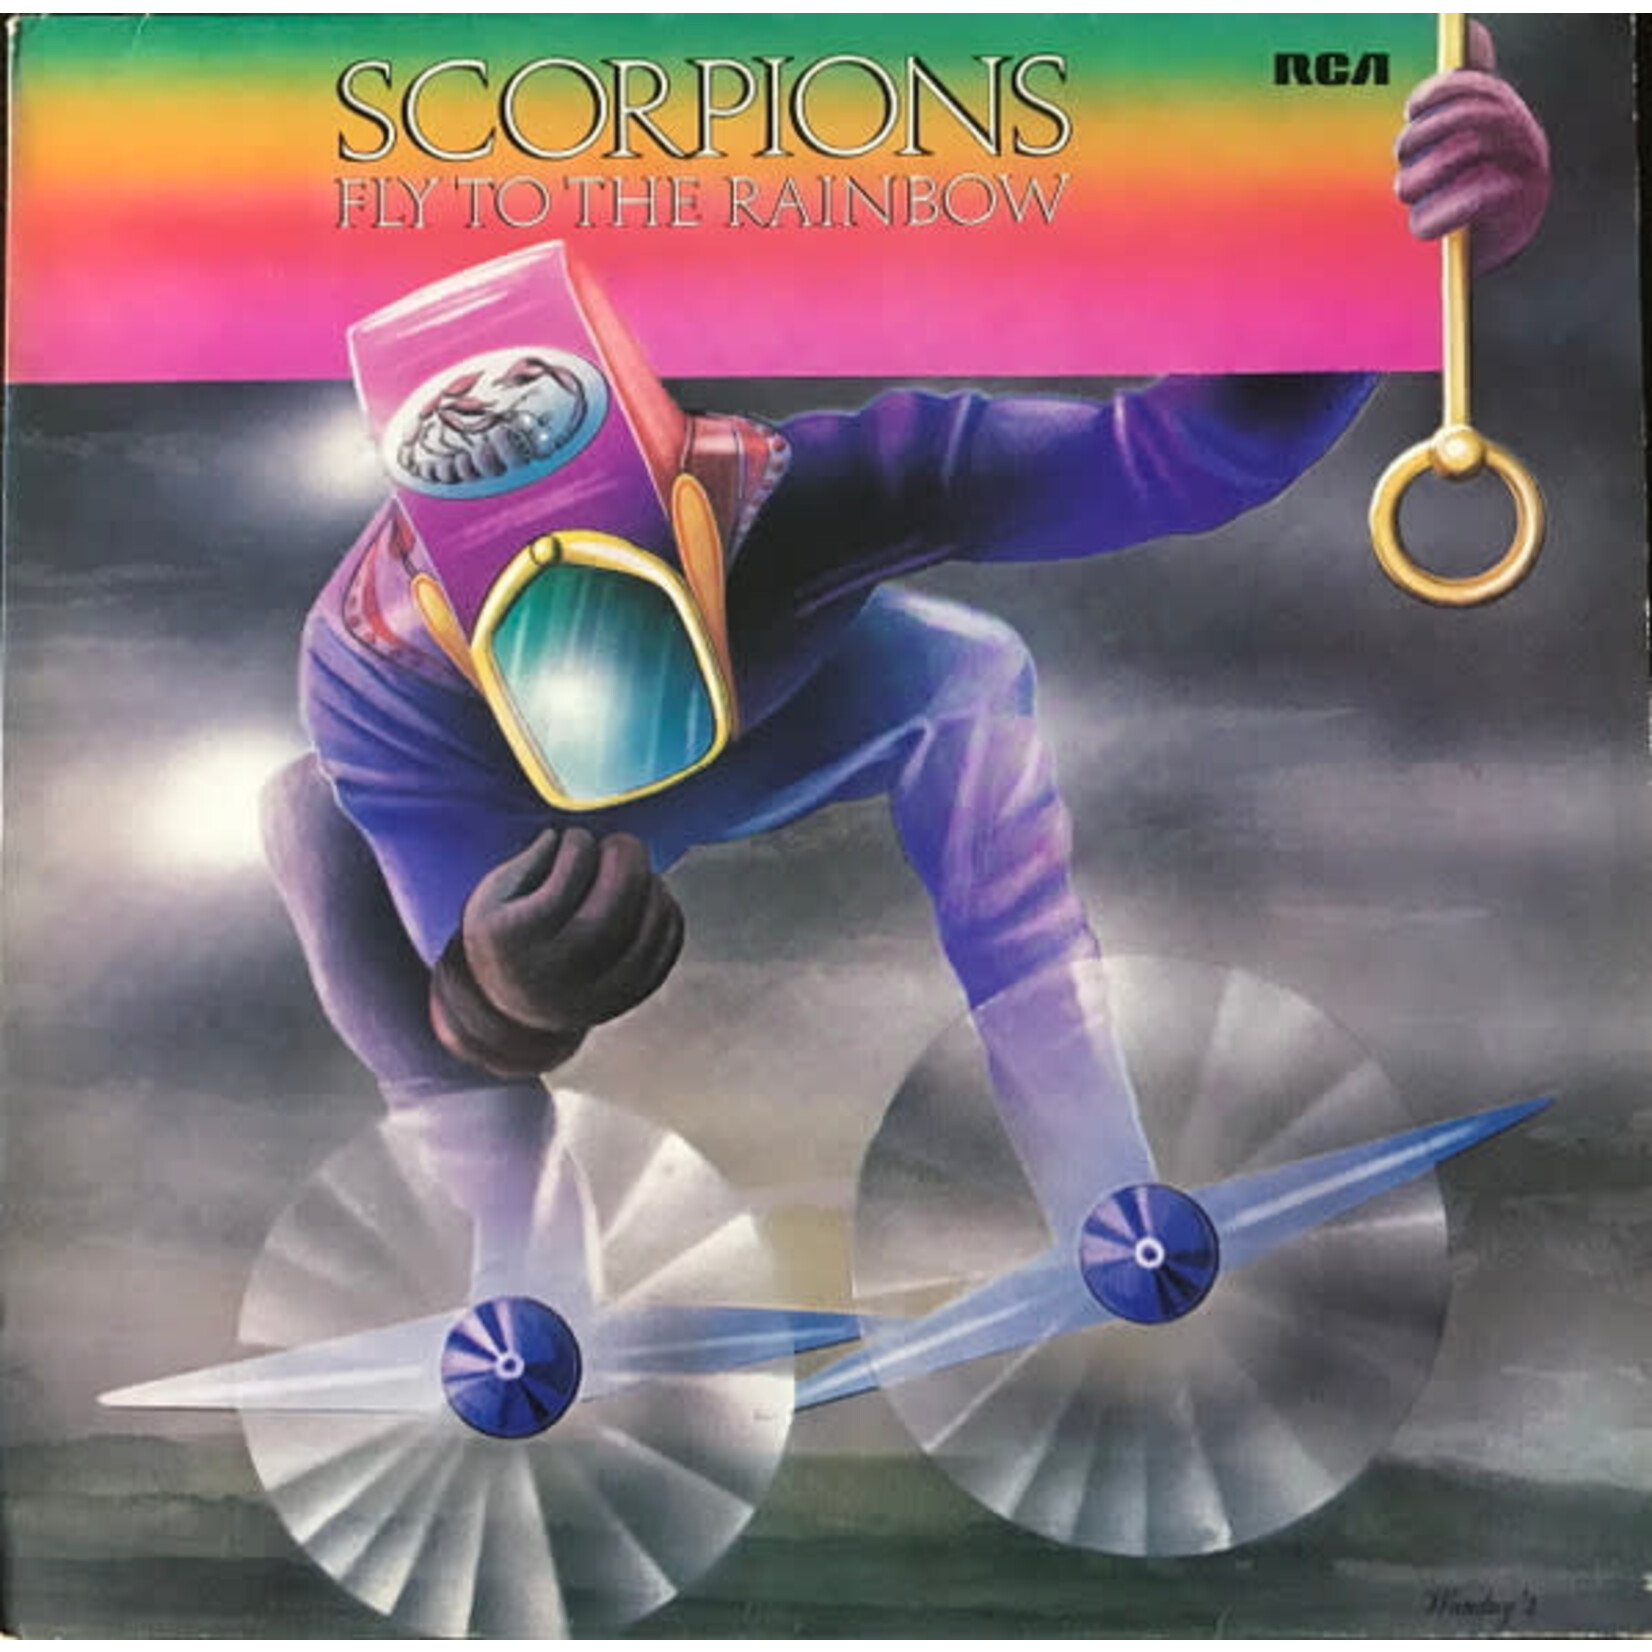 [New] Scorpions: Fly To The Rainbow (transparent purple vinyl, 180g, remastered) [BMG]